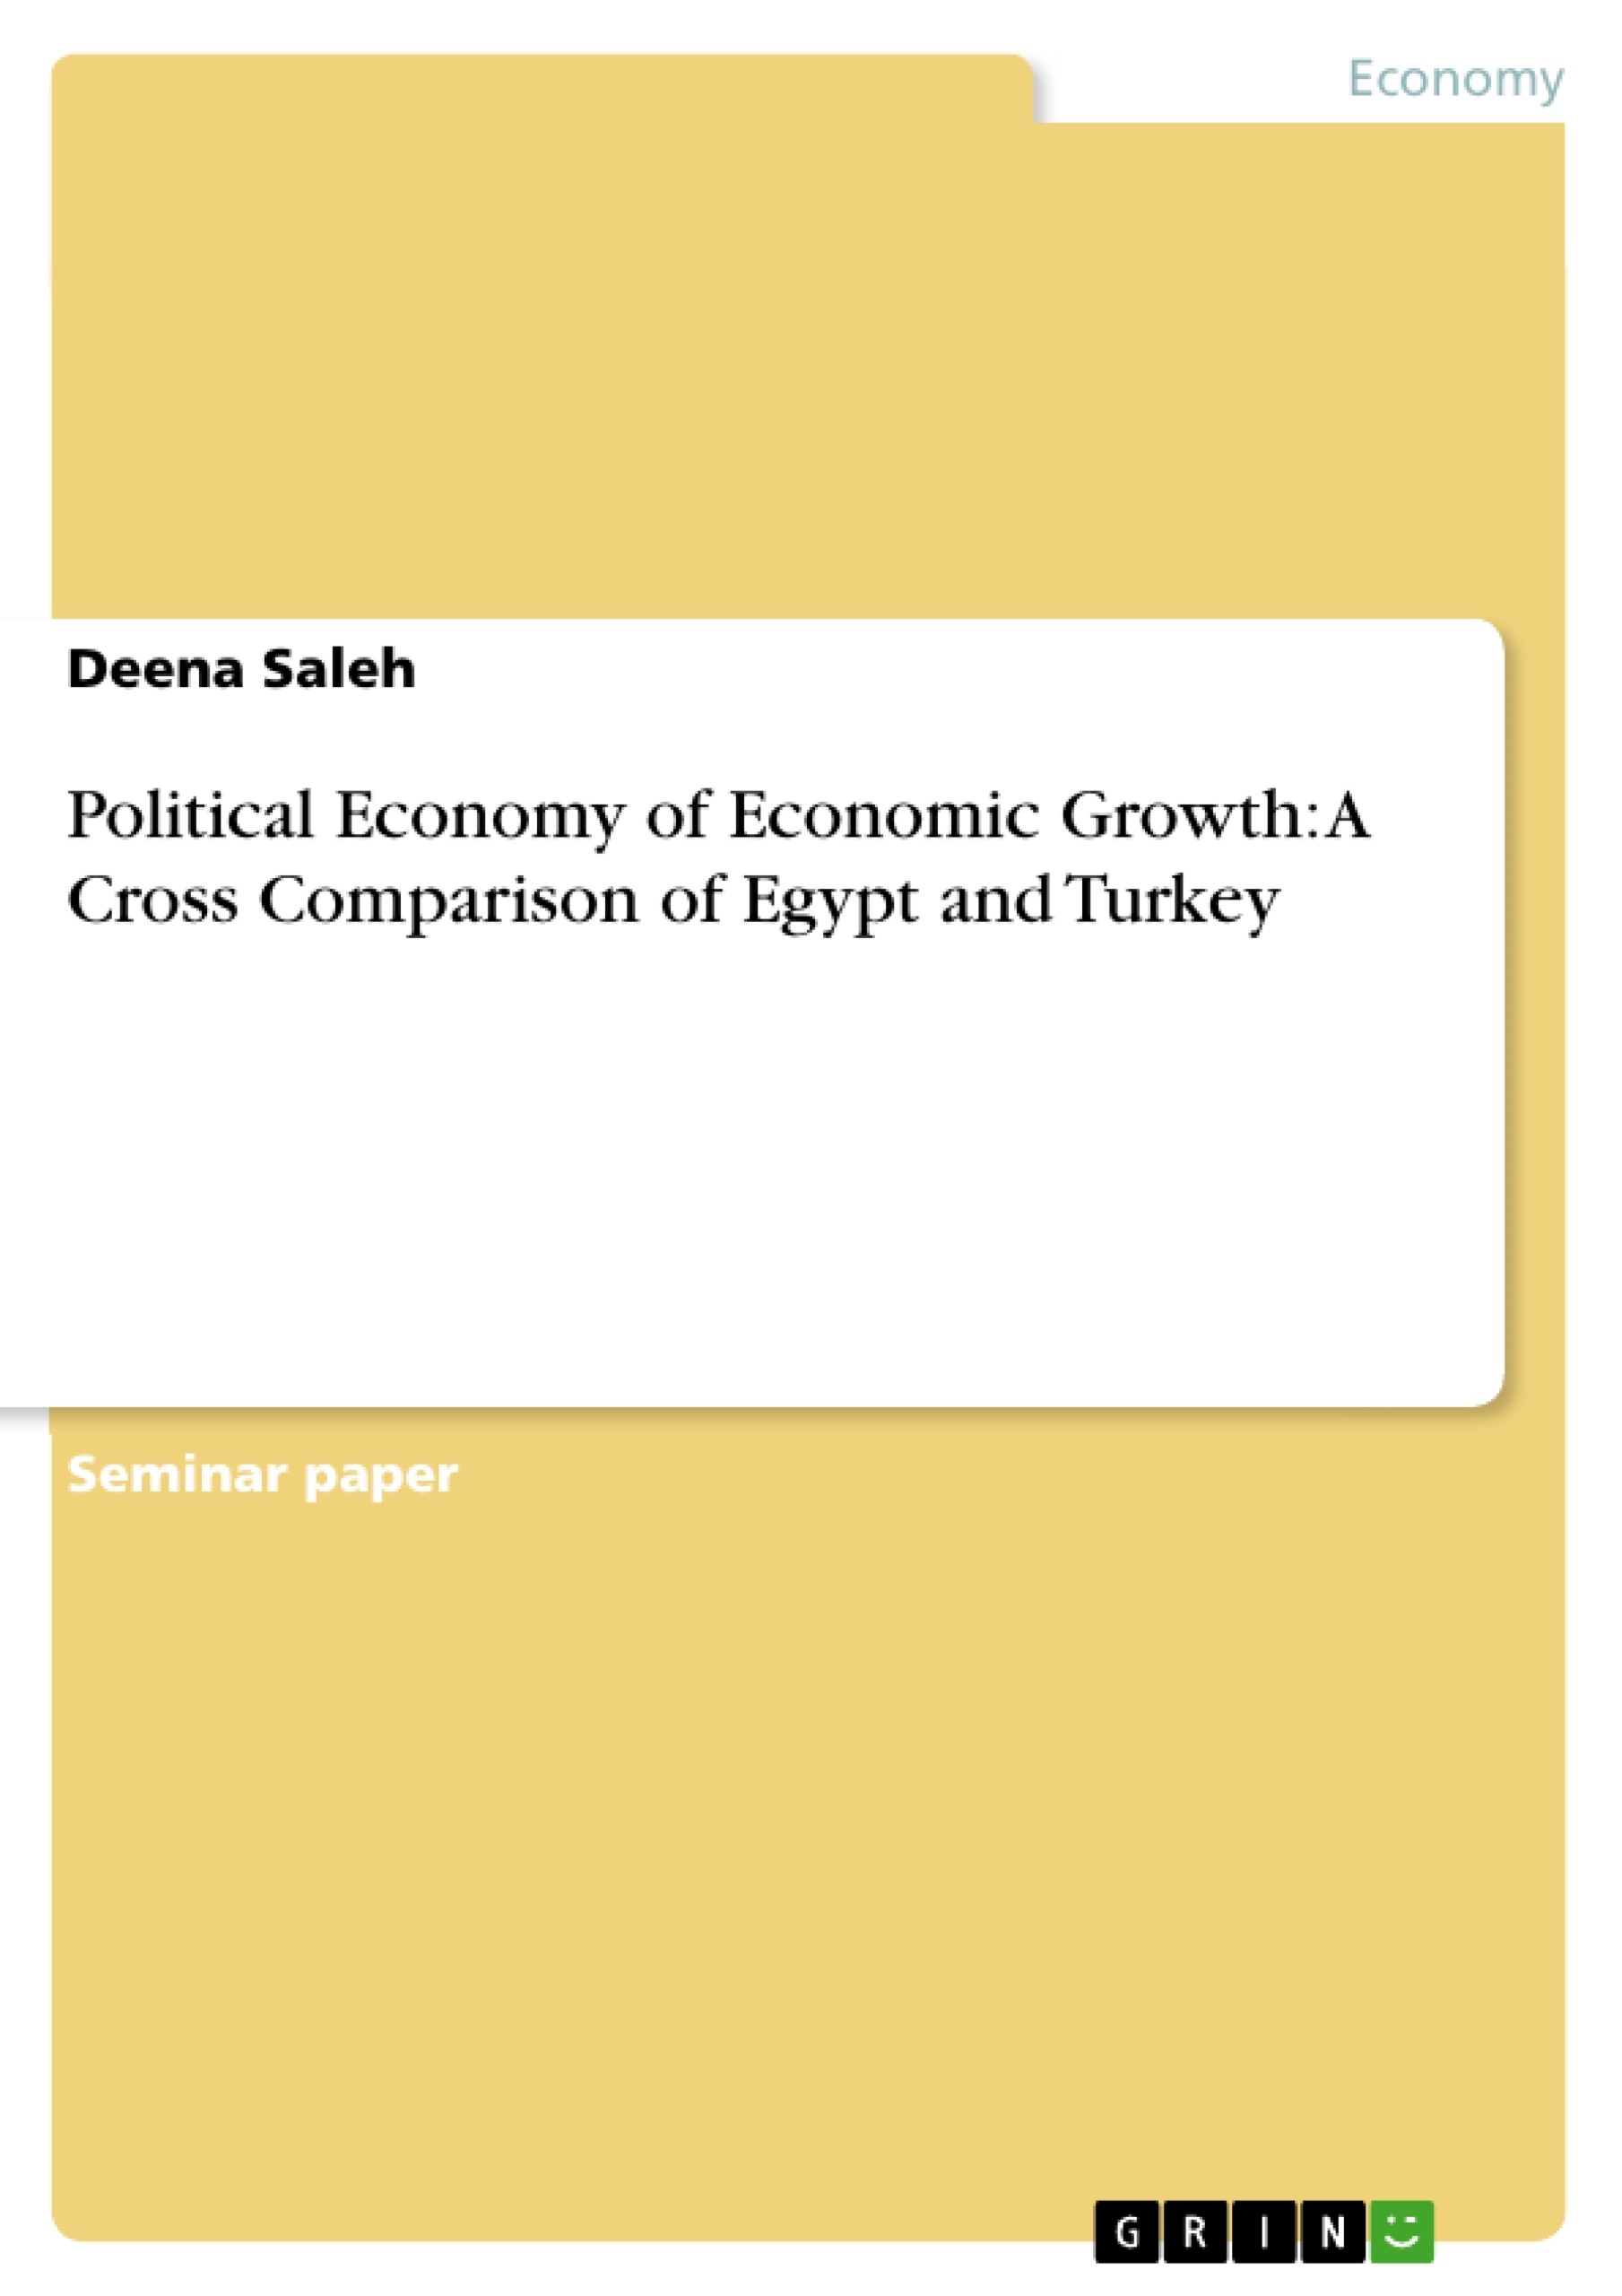 Titel: Political Economy of Economic Growth: A Cross Comparison of Egypt and Turkey